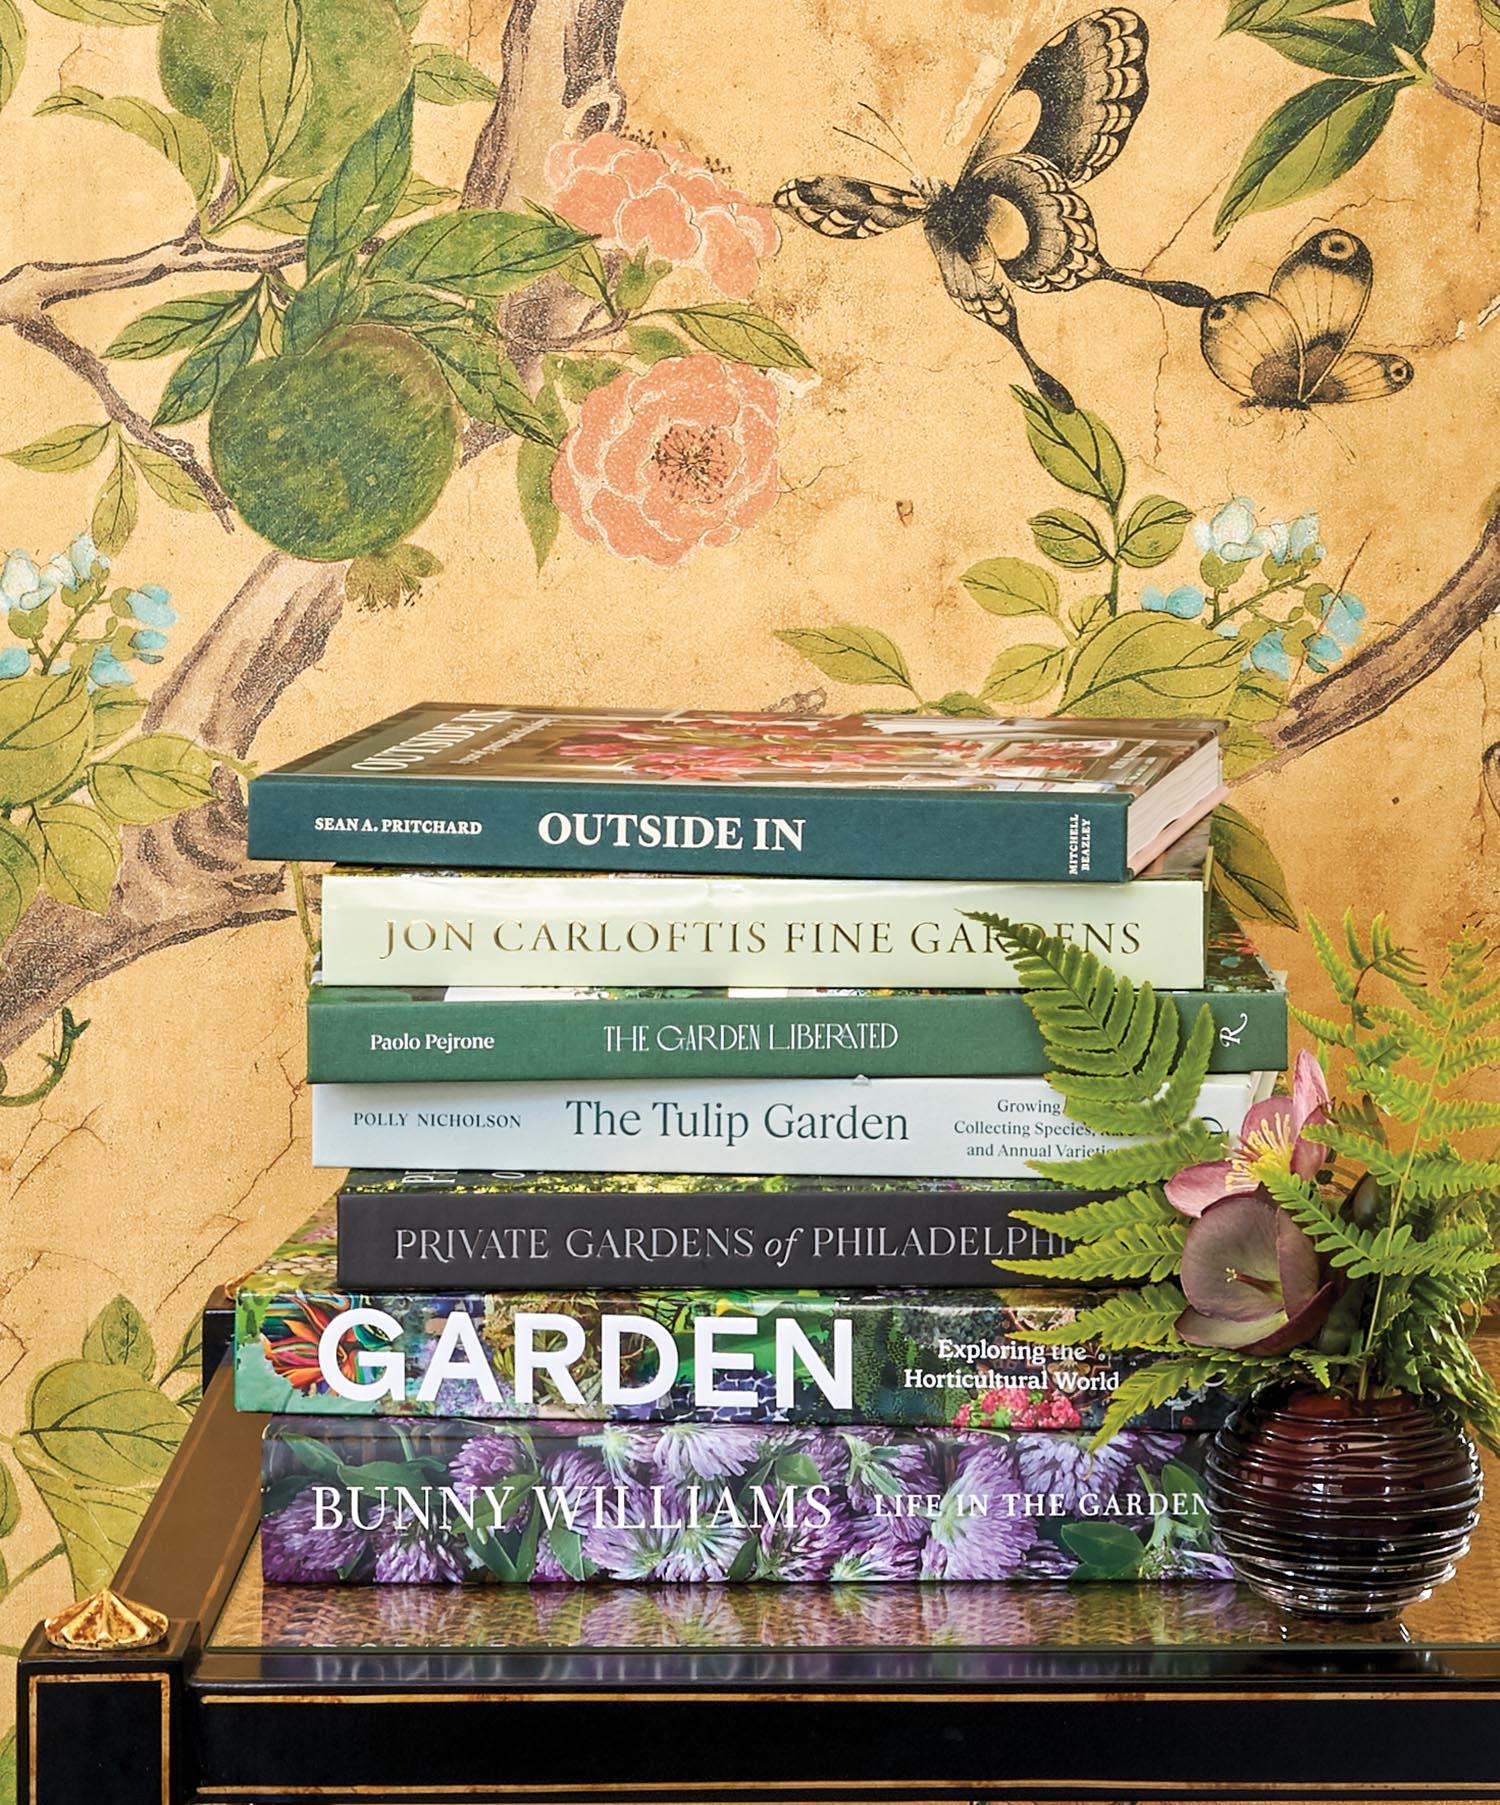 A pile of books in front of floral wallpaper.